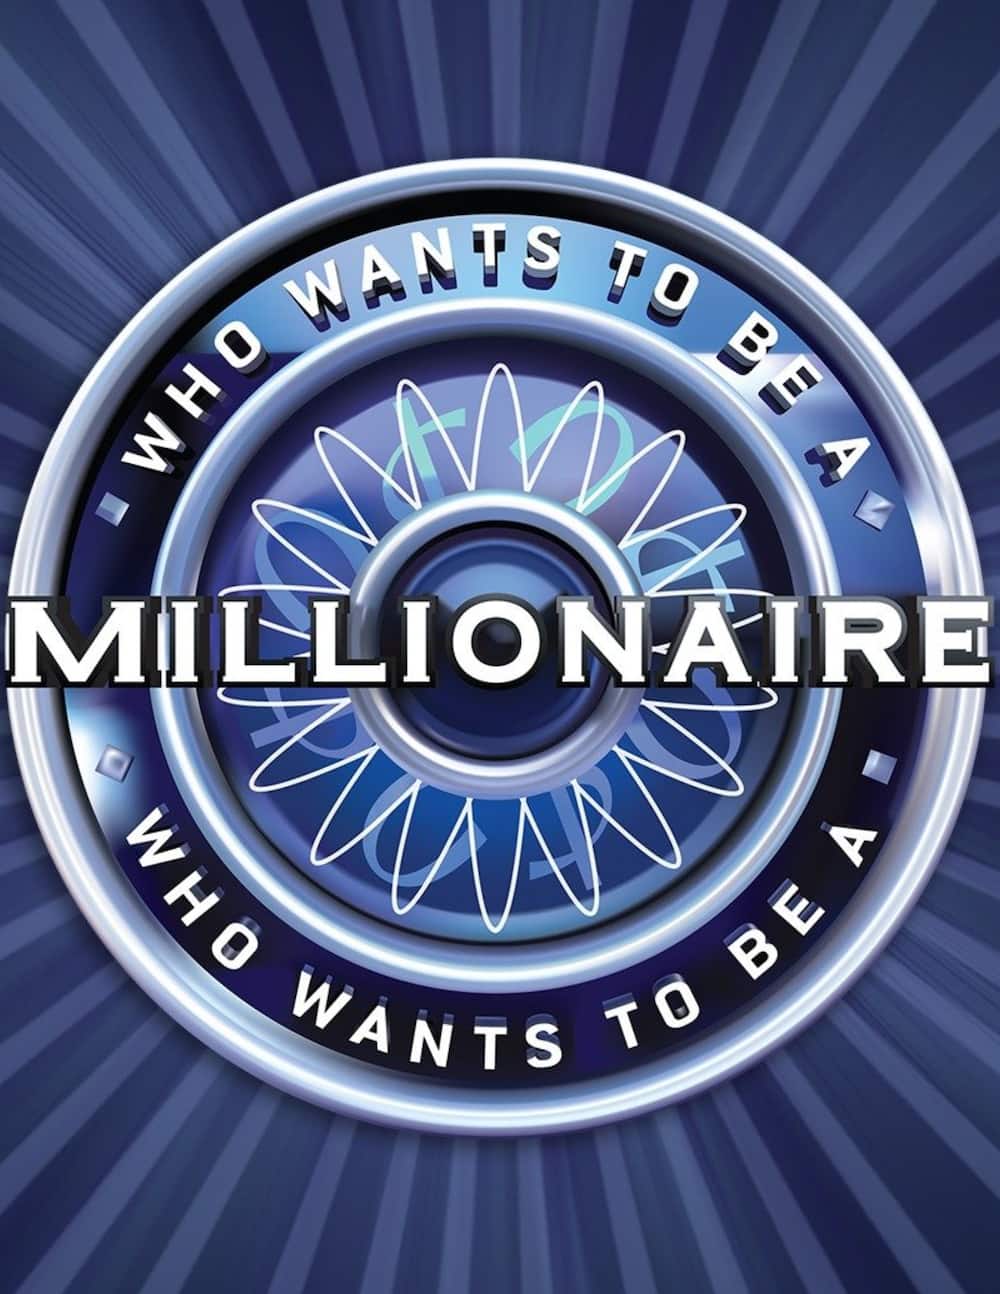 kykNET's Who Wants to Be a Millionaire